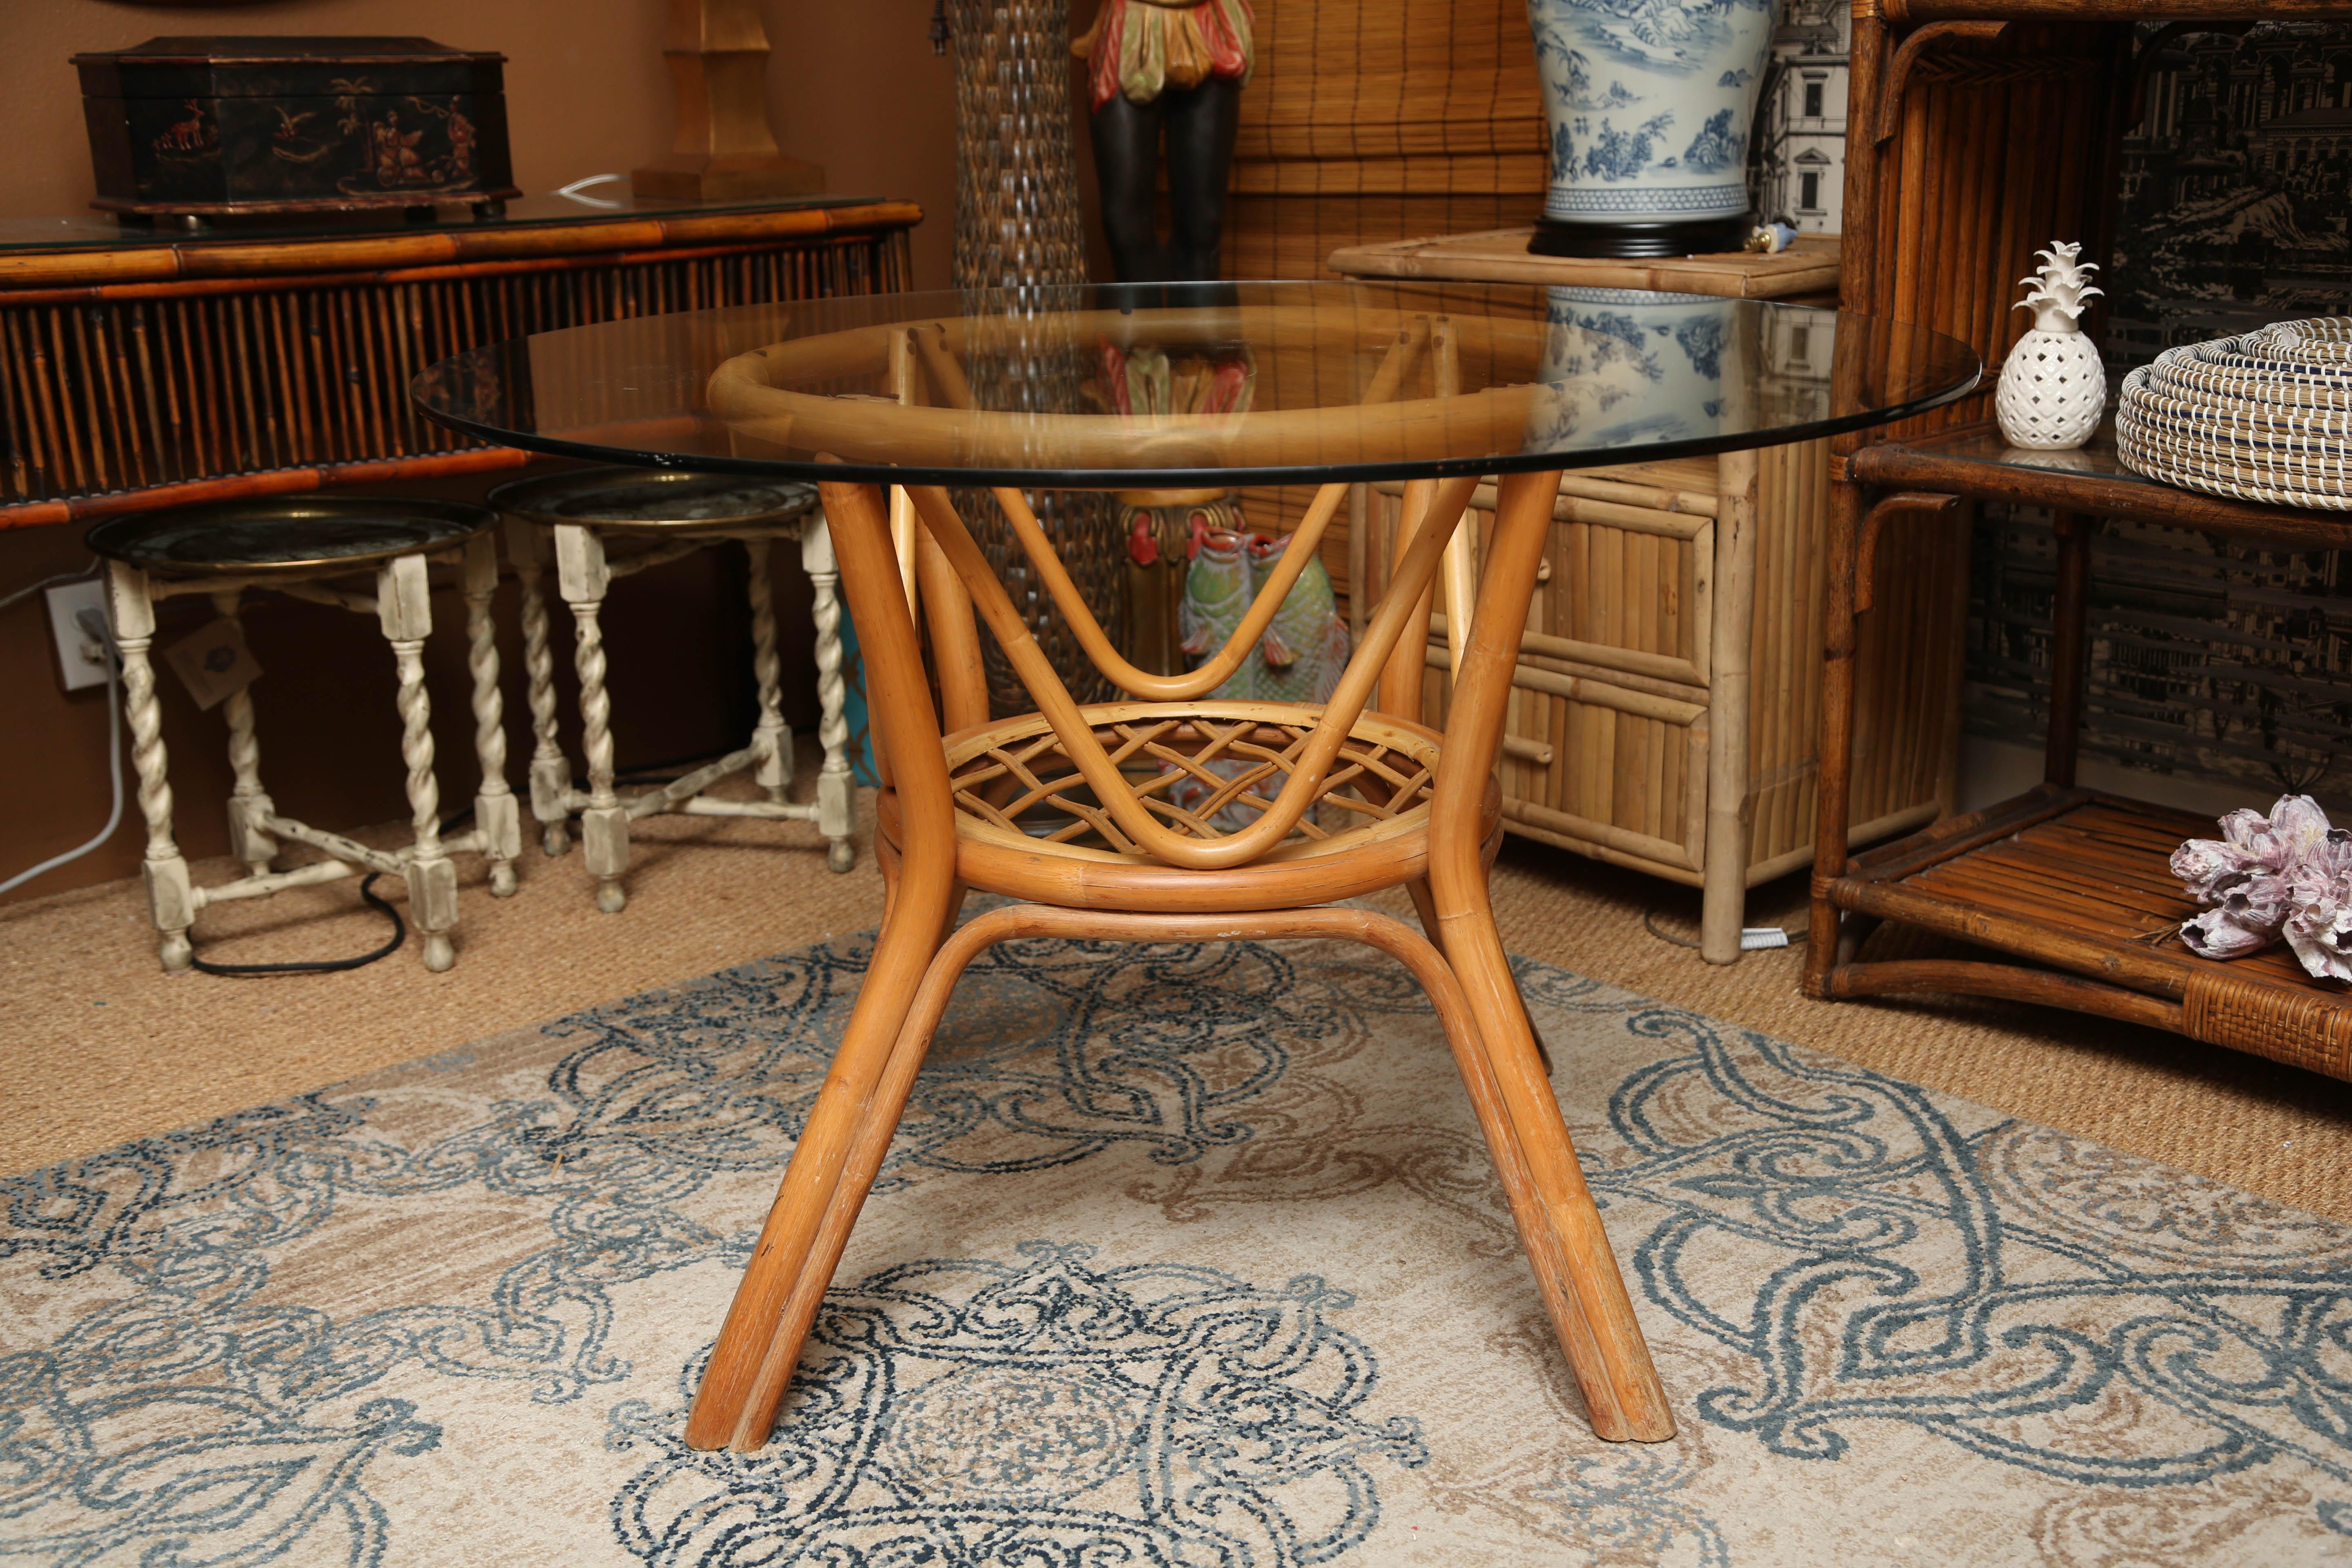 Superb vintage Rattan centre table with four chairs.
Table H 42, W 34.